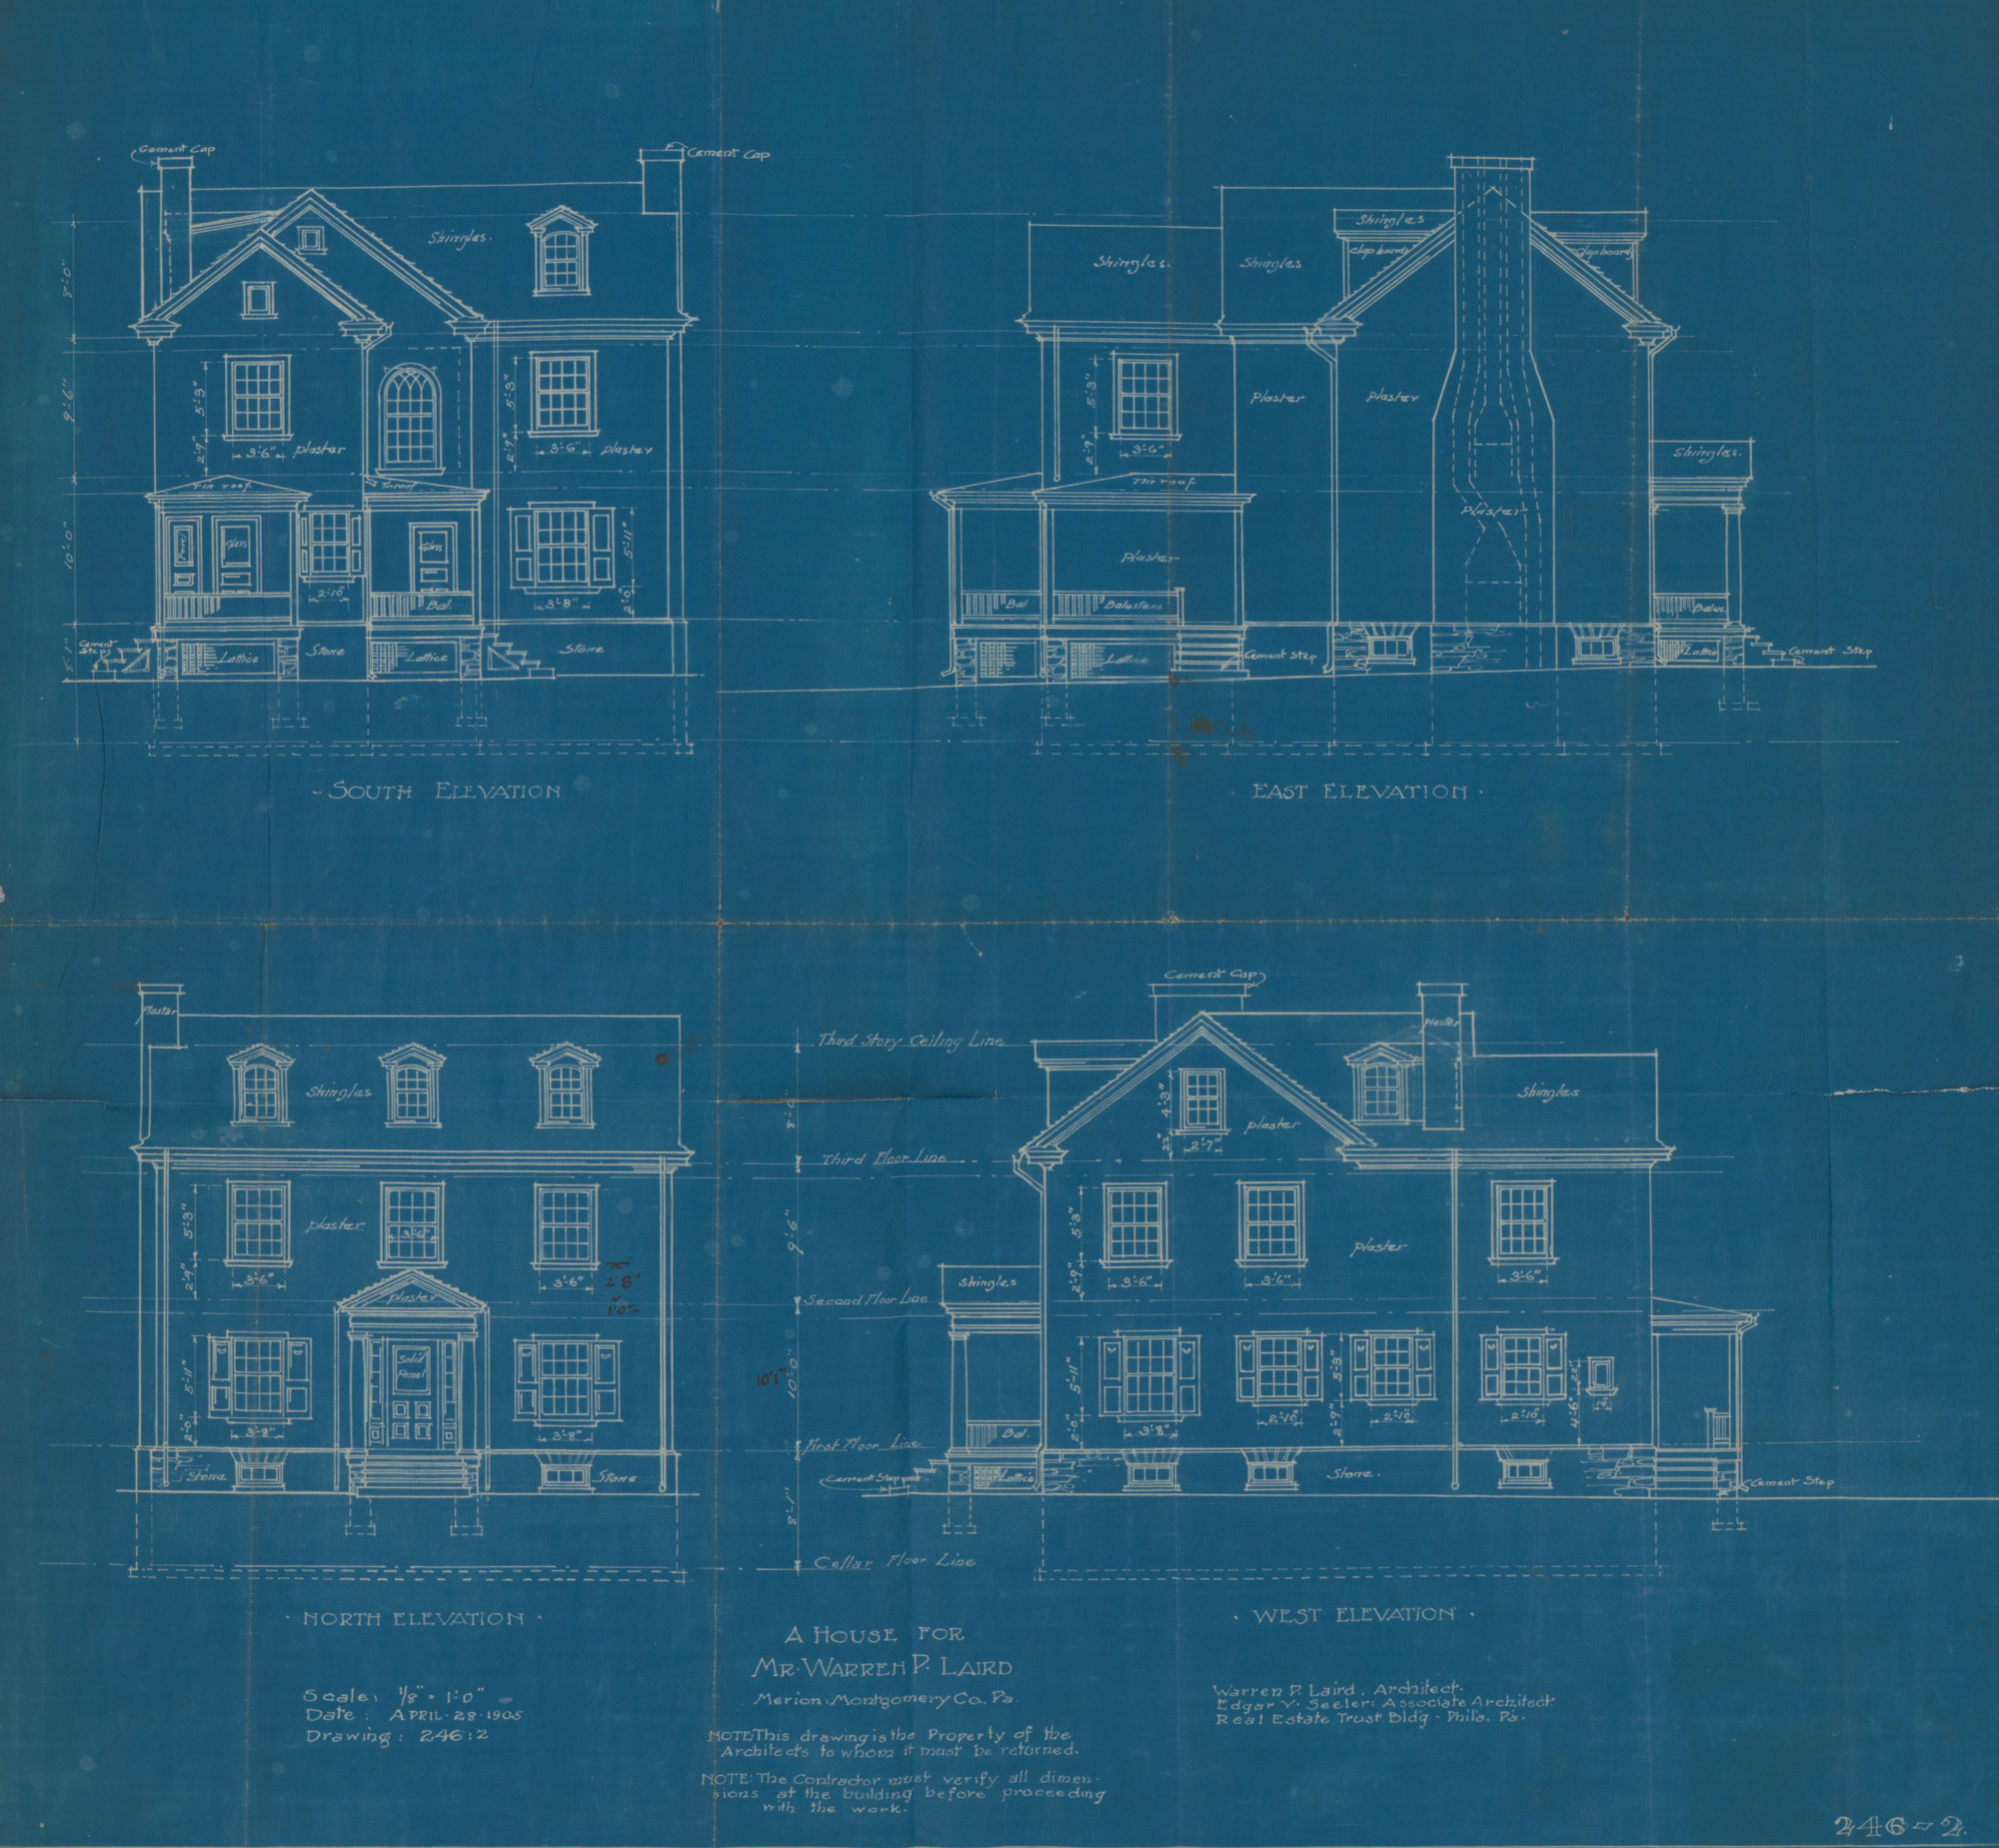 Blueprint with elevations for Warren Powers Laird house